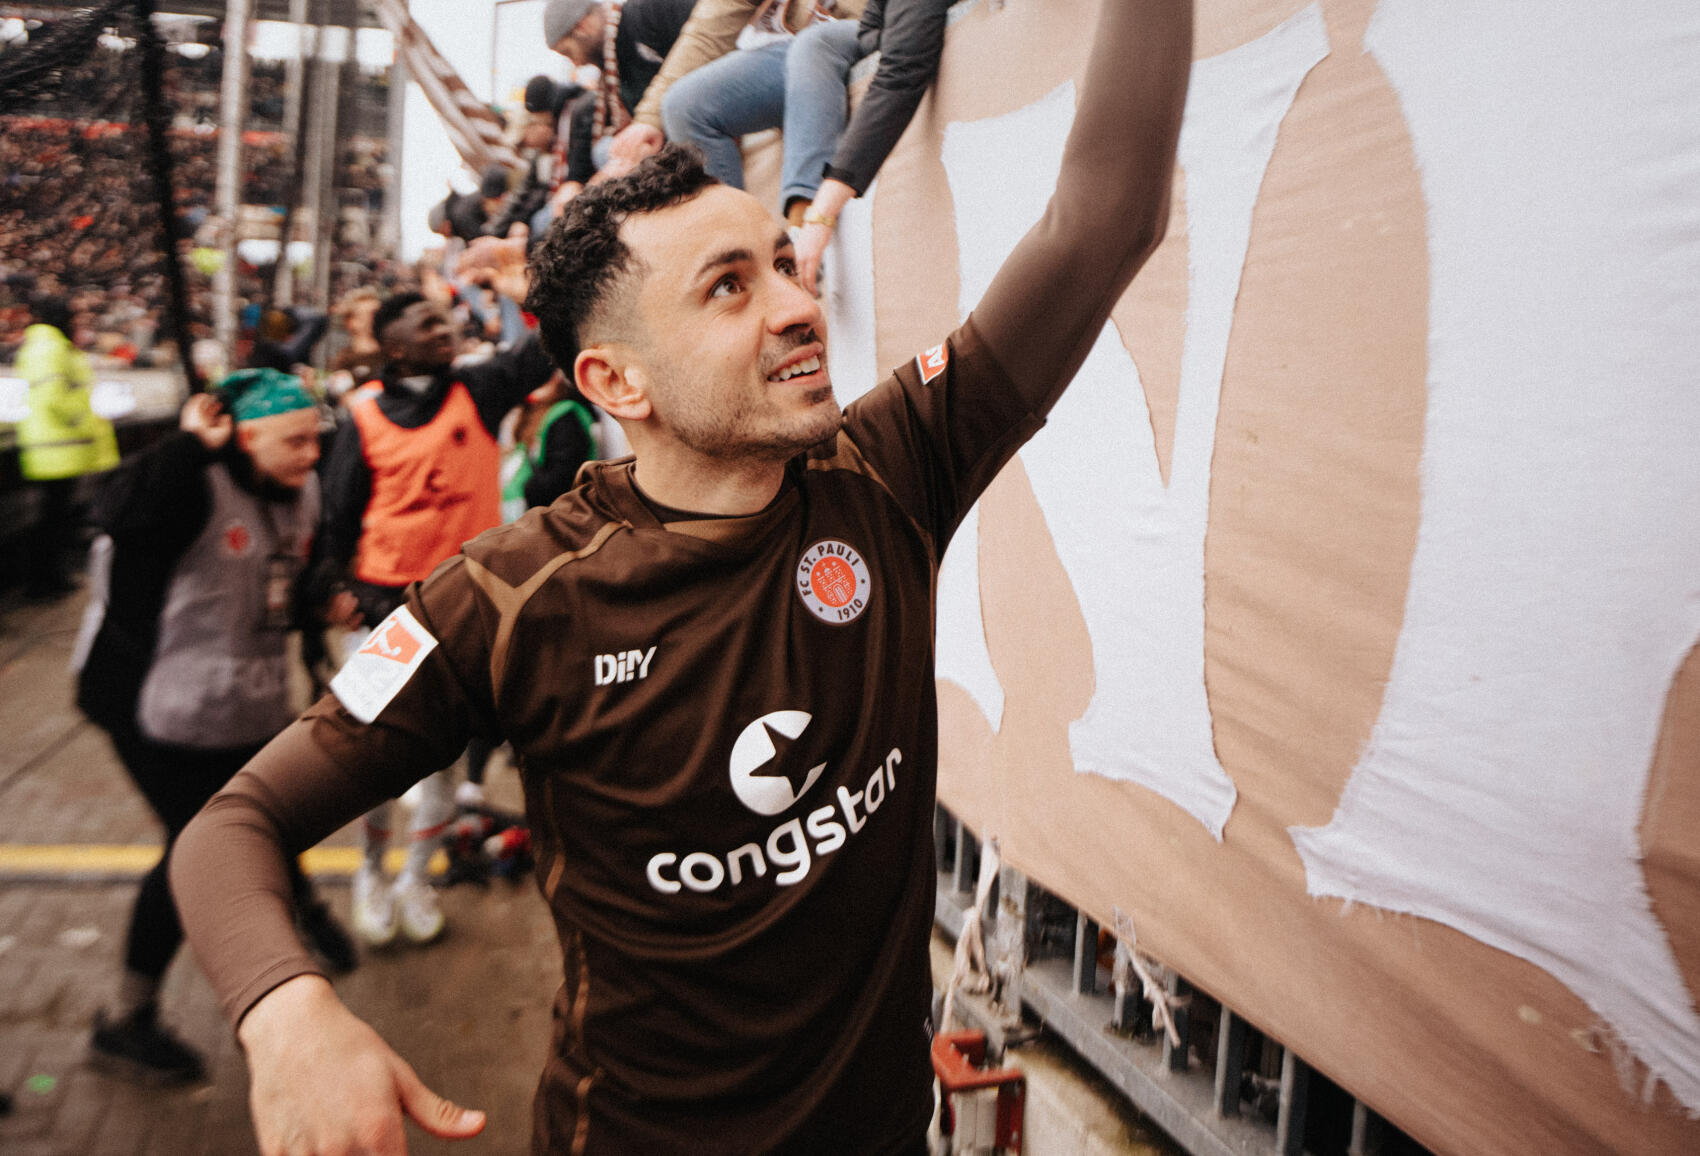 Manolis Saliakas celebrates with the fans after the 2-1 home win over Fürth.